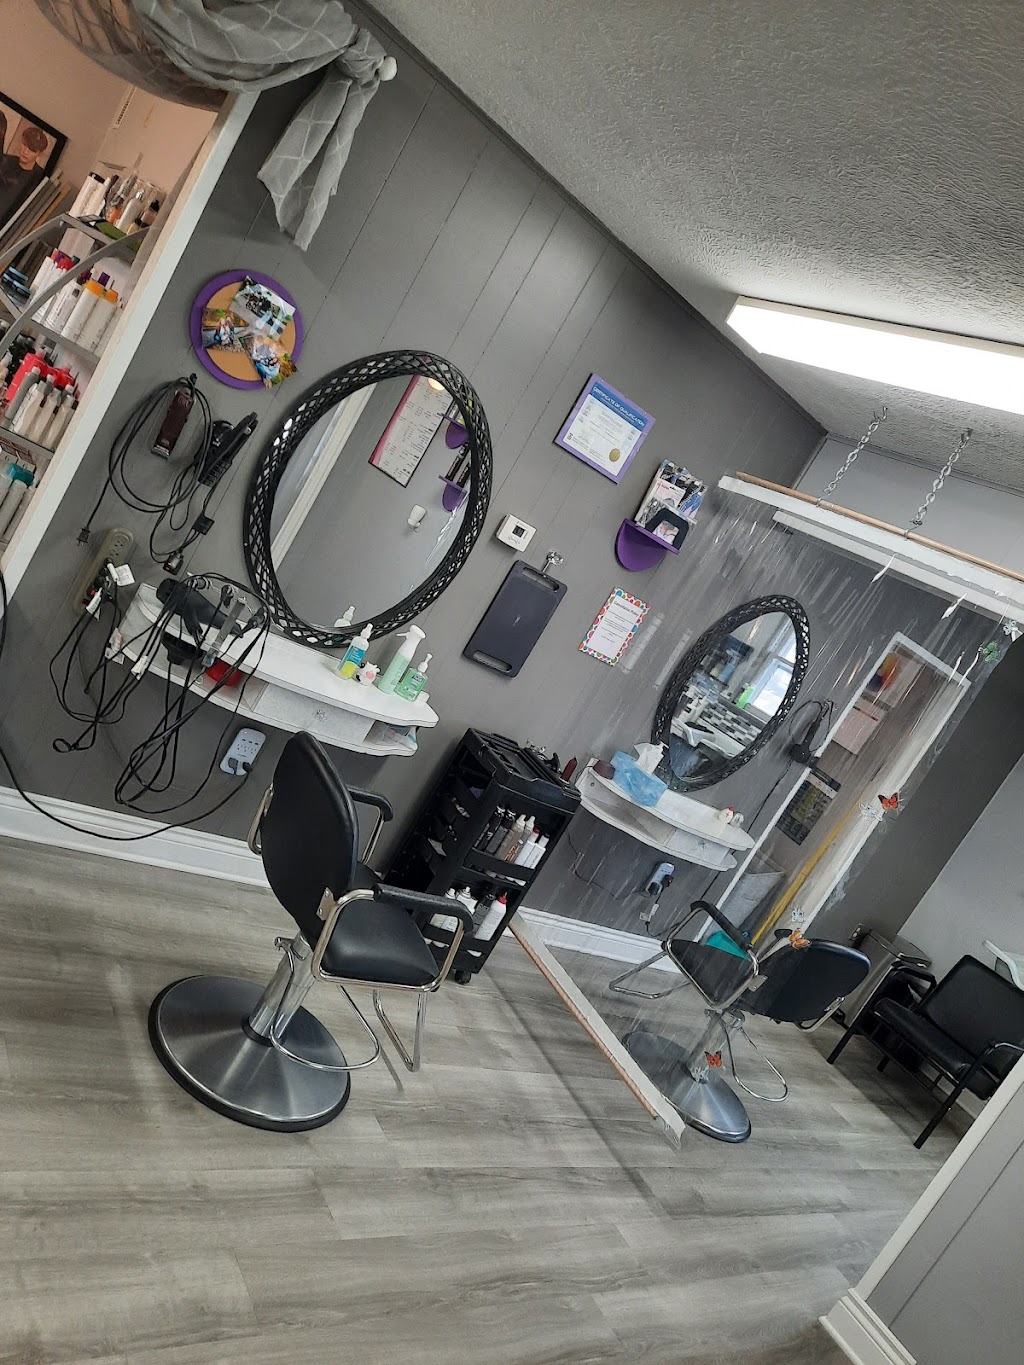 House of Hair Design | 3924 Victoria Ave, Vineland, ON L0R 2C0, Canada | Phone: (905) 562-7206